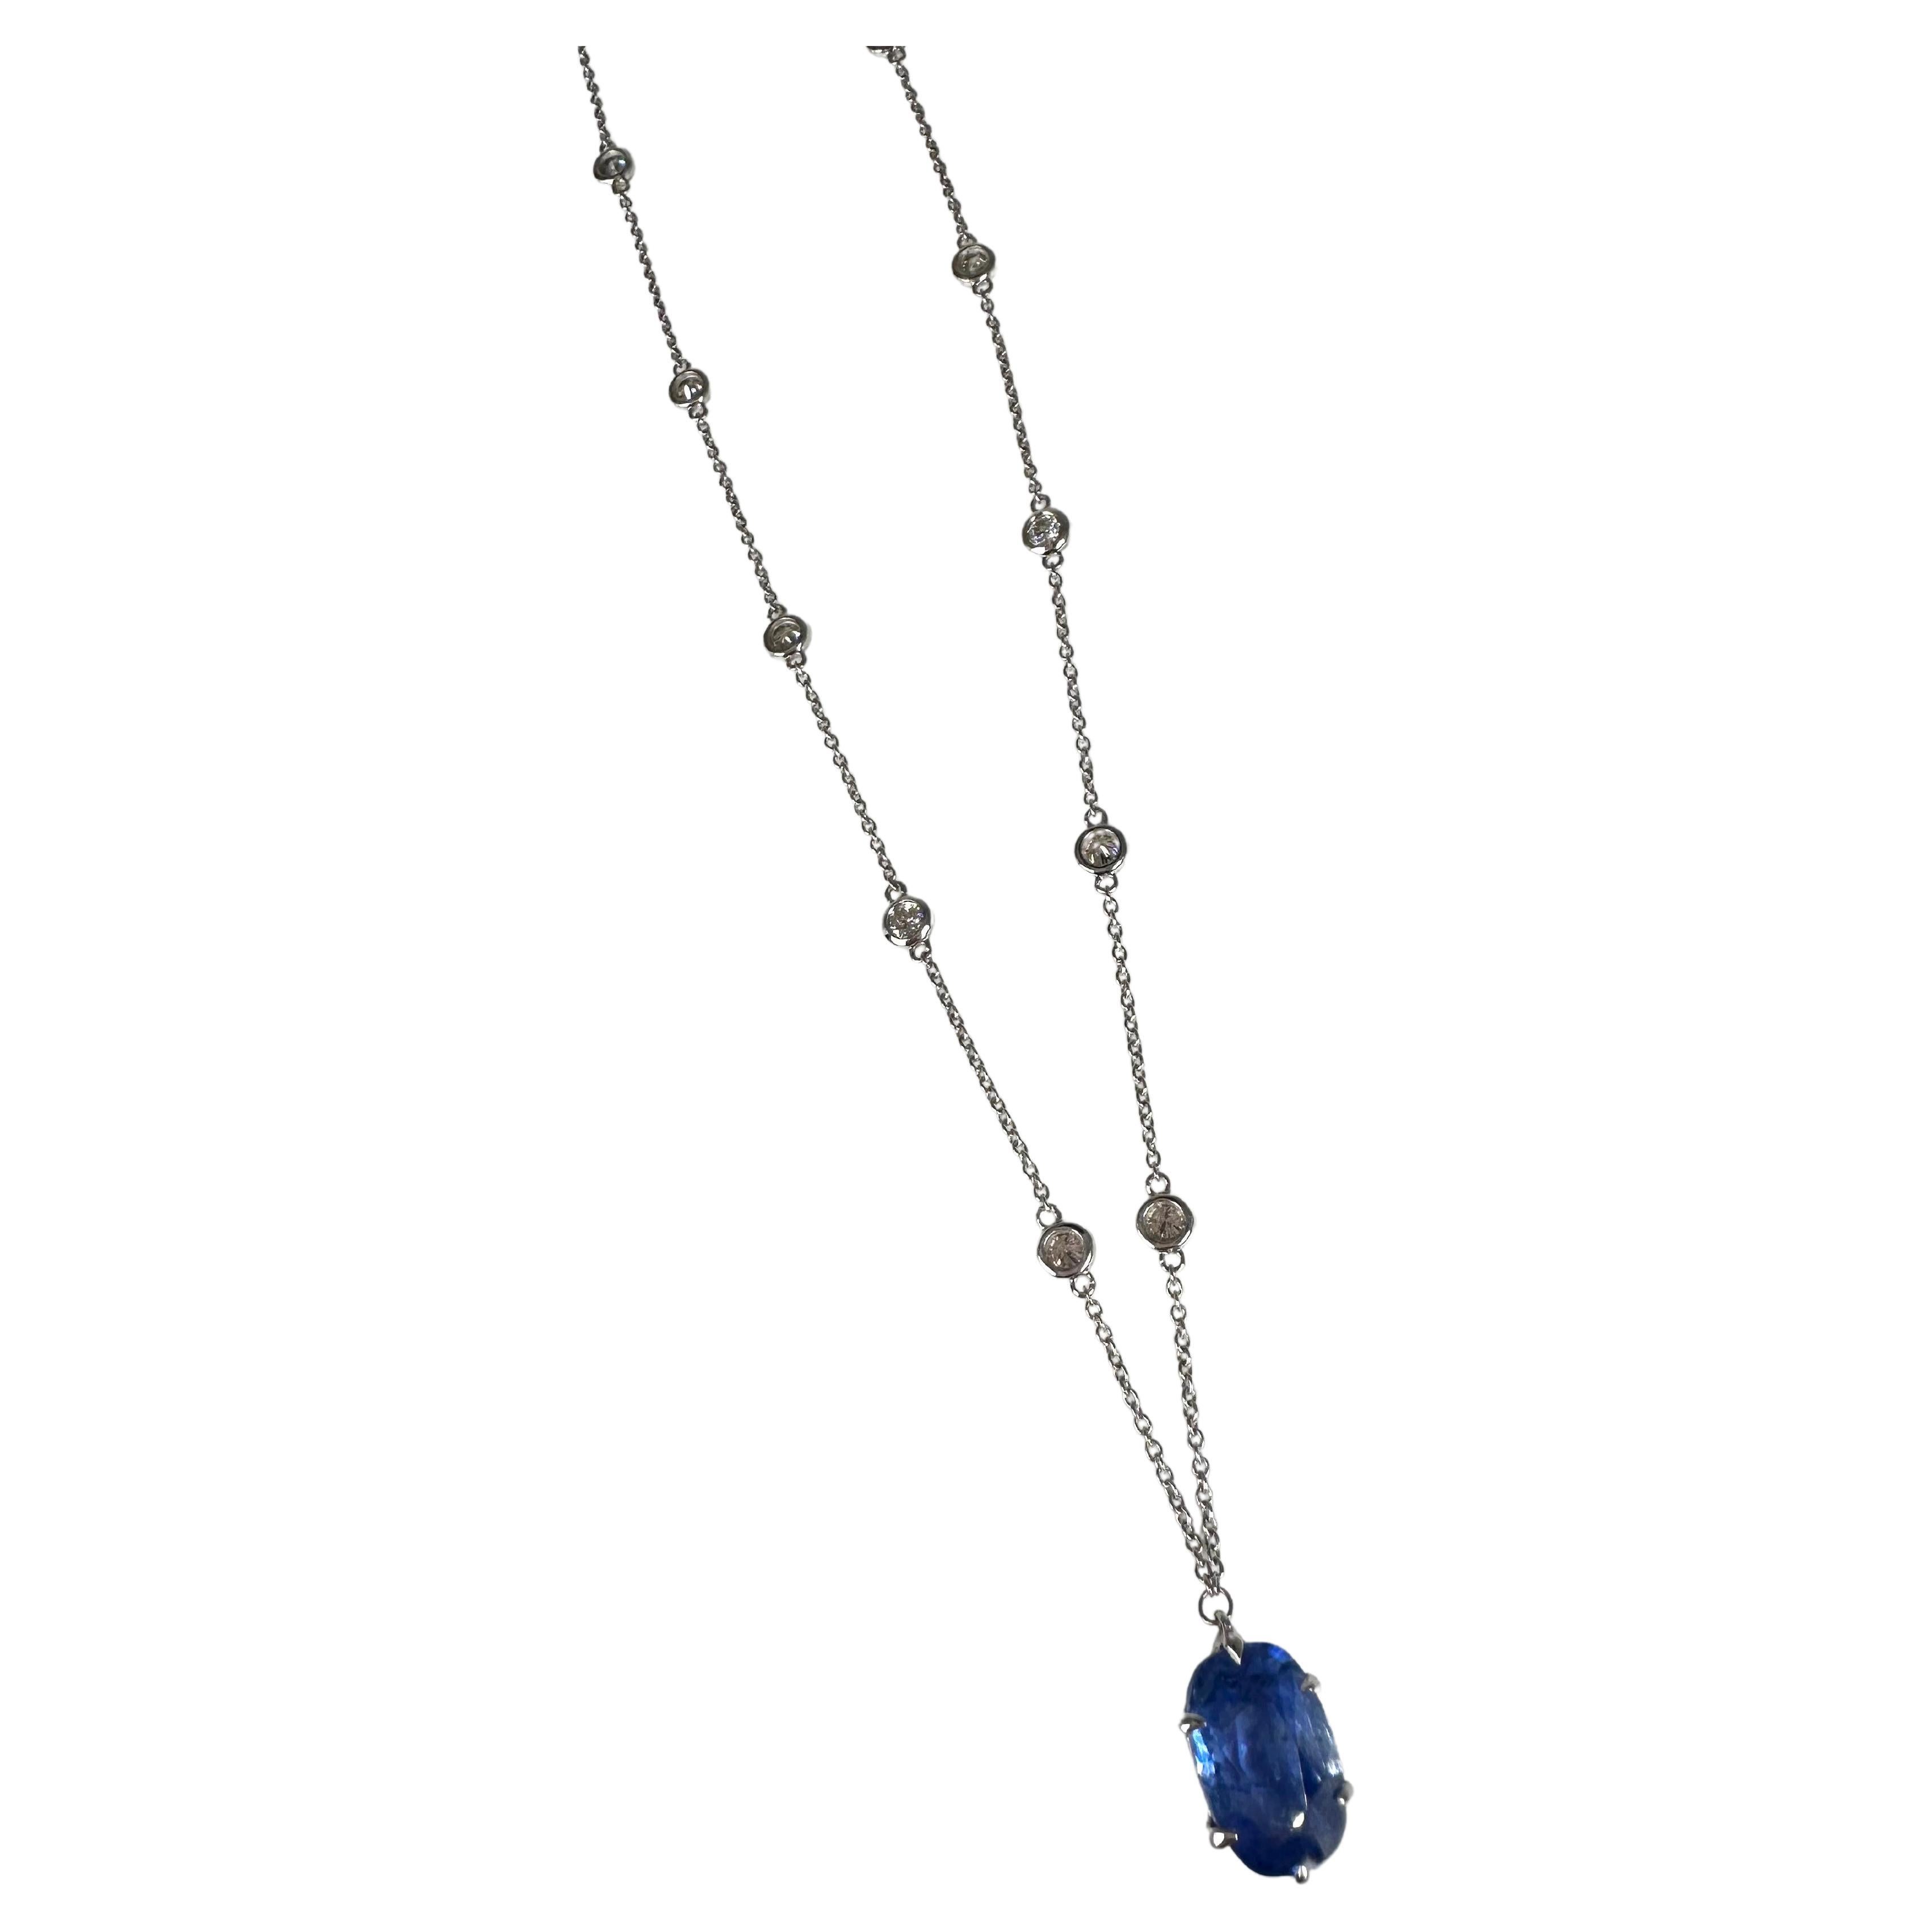 Rare Large Sapphire Diamond Pendant Necklace by the Yard 14kt 5.14ct Sapphire For Sale